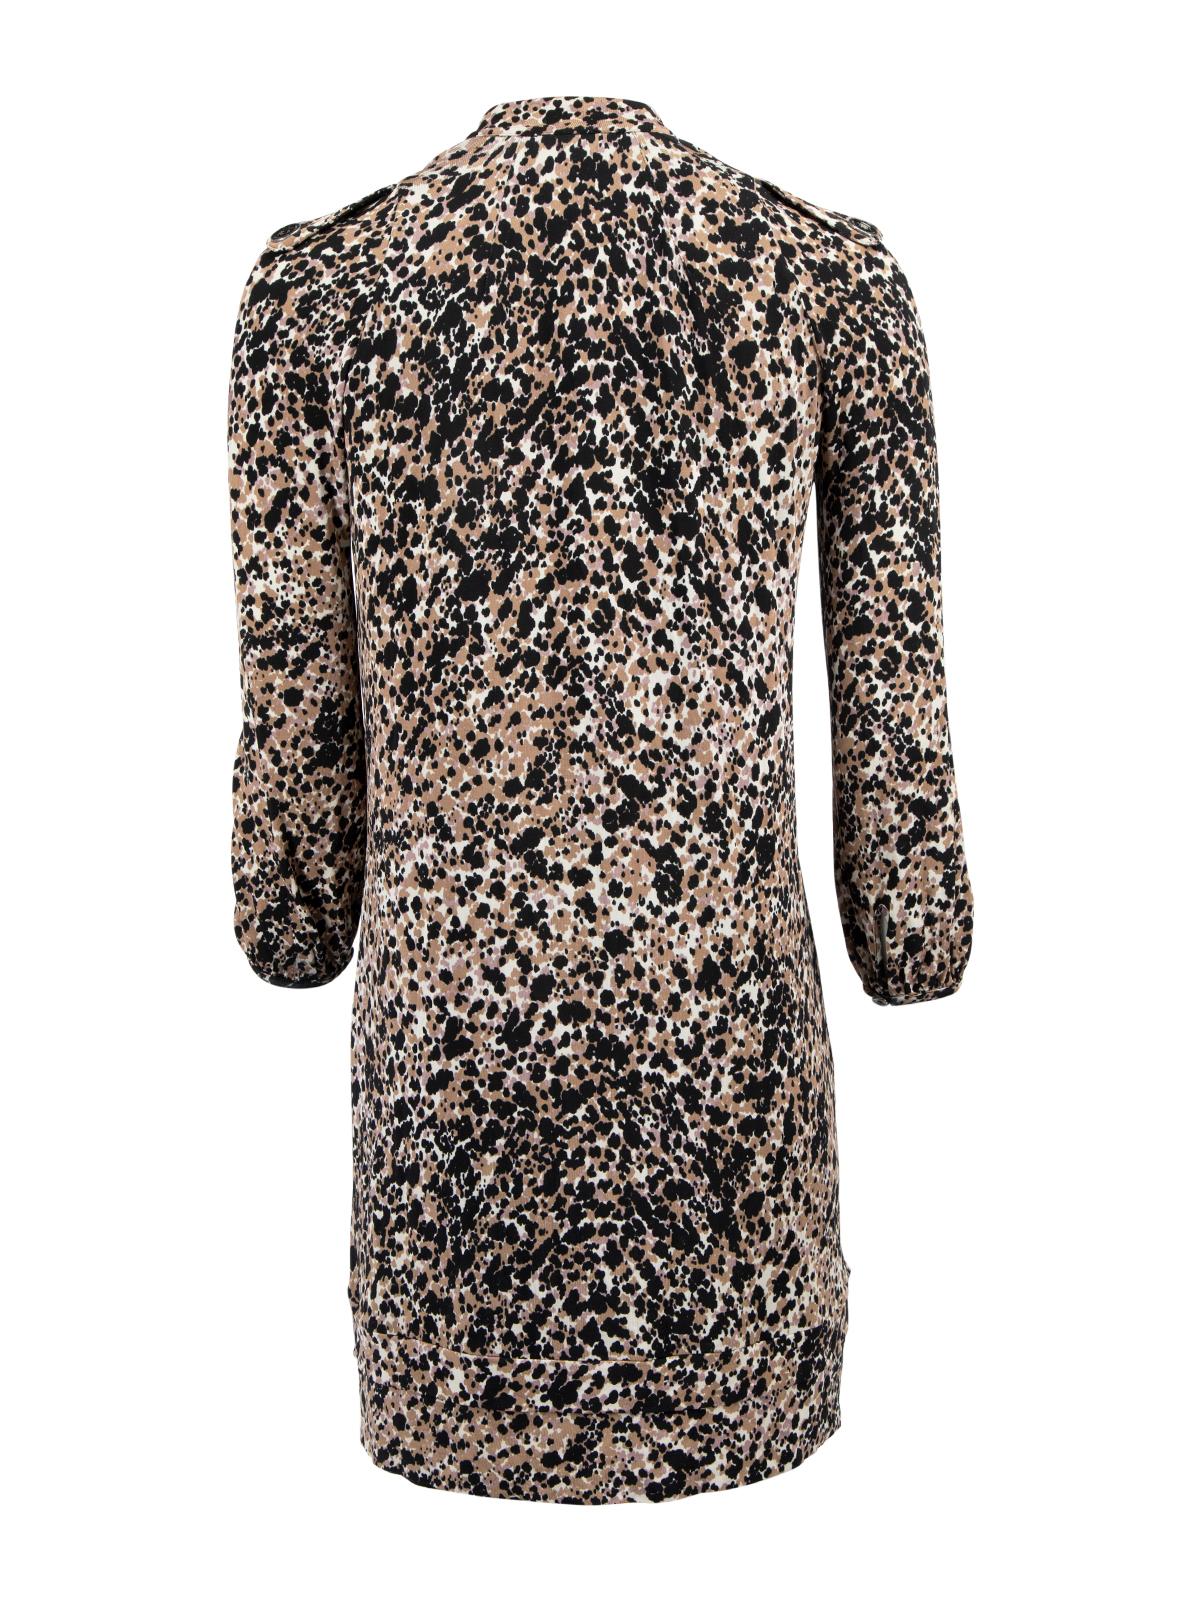 Pre-Loved Burberry Women's Leopard Print Patterned Dress In Excellent Condition For Sale In London, GB